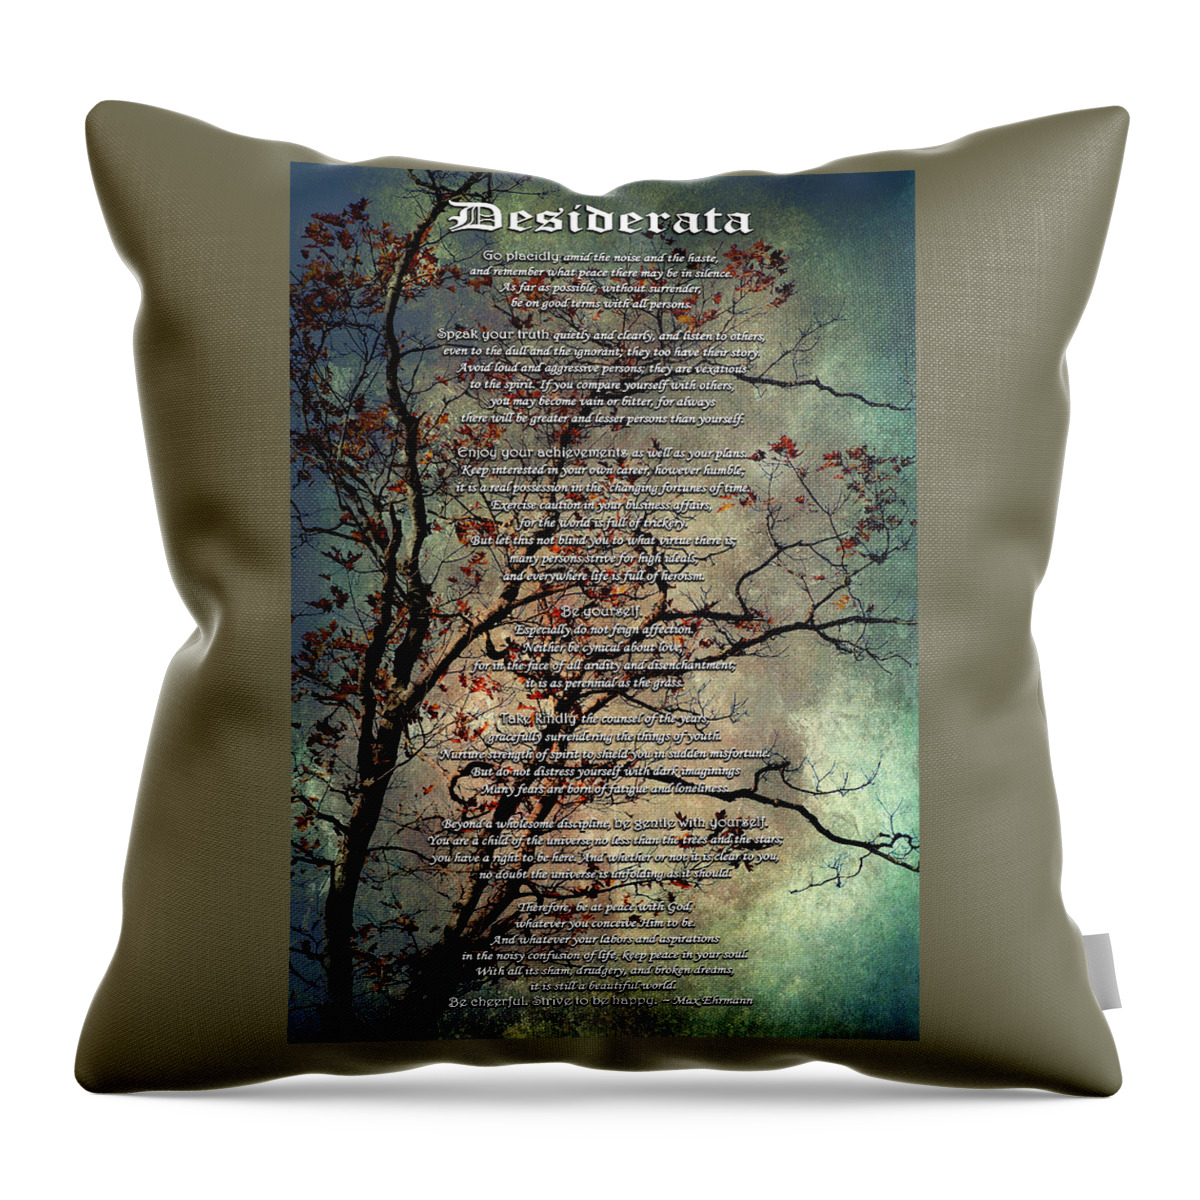 Desiderata Throw Pillow featuring the mixed media Desiderata Inspiration Over Old Textured Tree by Christina Rollo